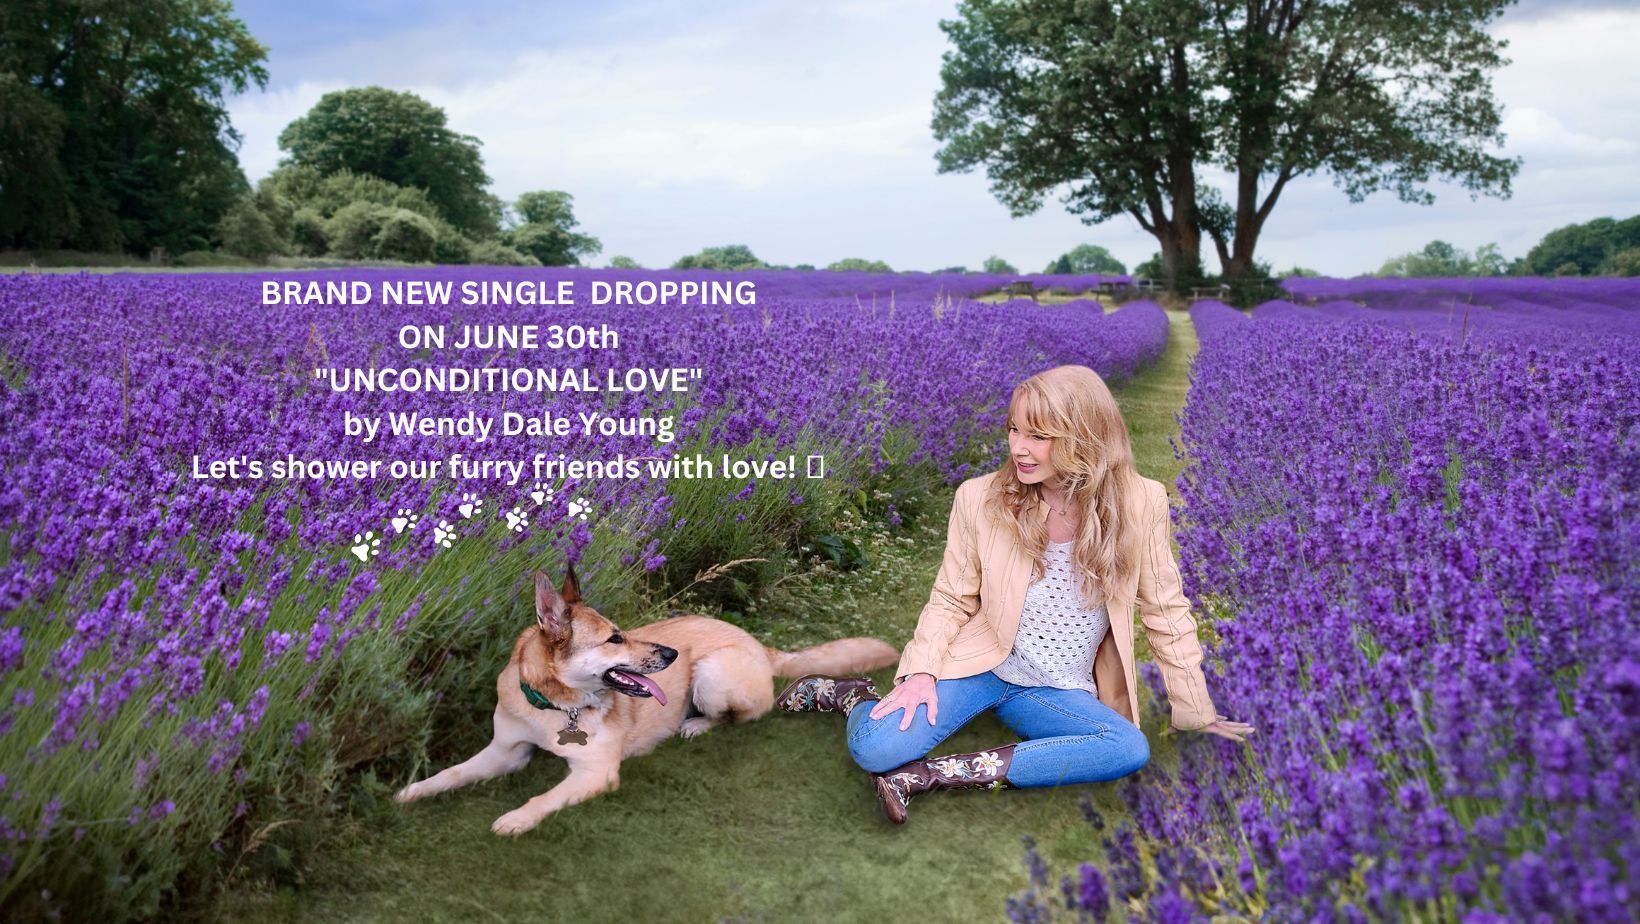 BRAND NEW SINGLE DROPPING ON JUNE 21st UNCONDITIONAL LOVE by Wendy Dale Young Let’s shower our furry friends with love! 🐾